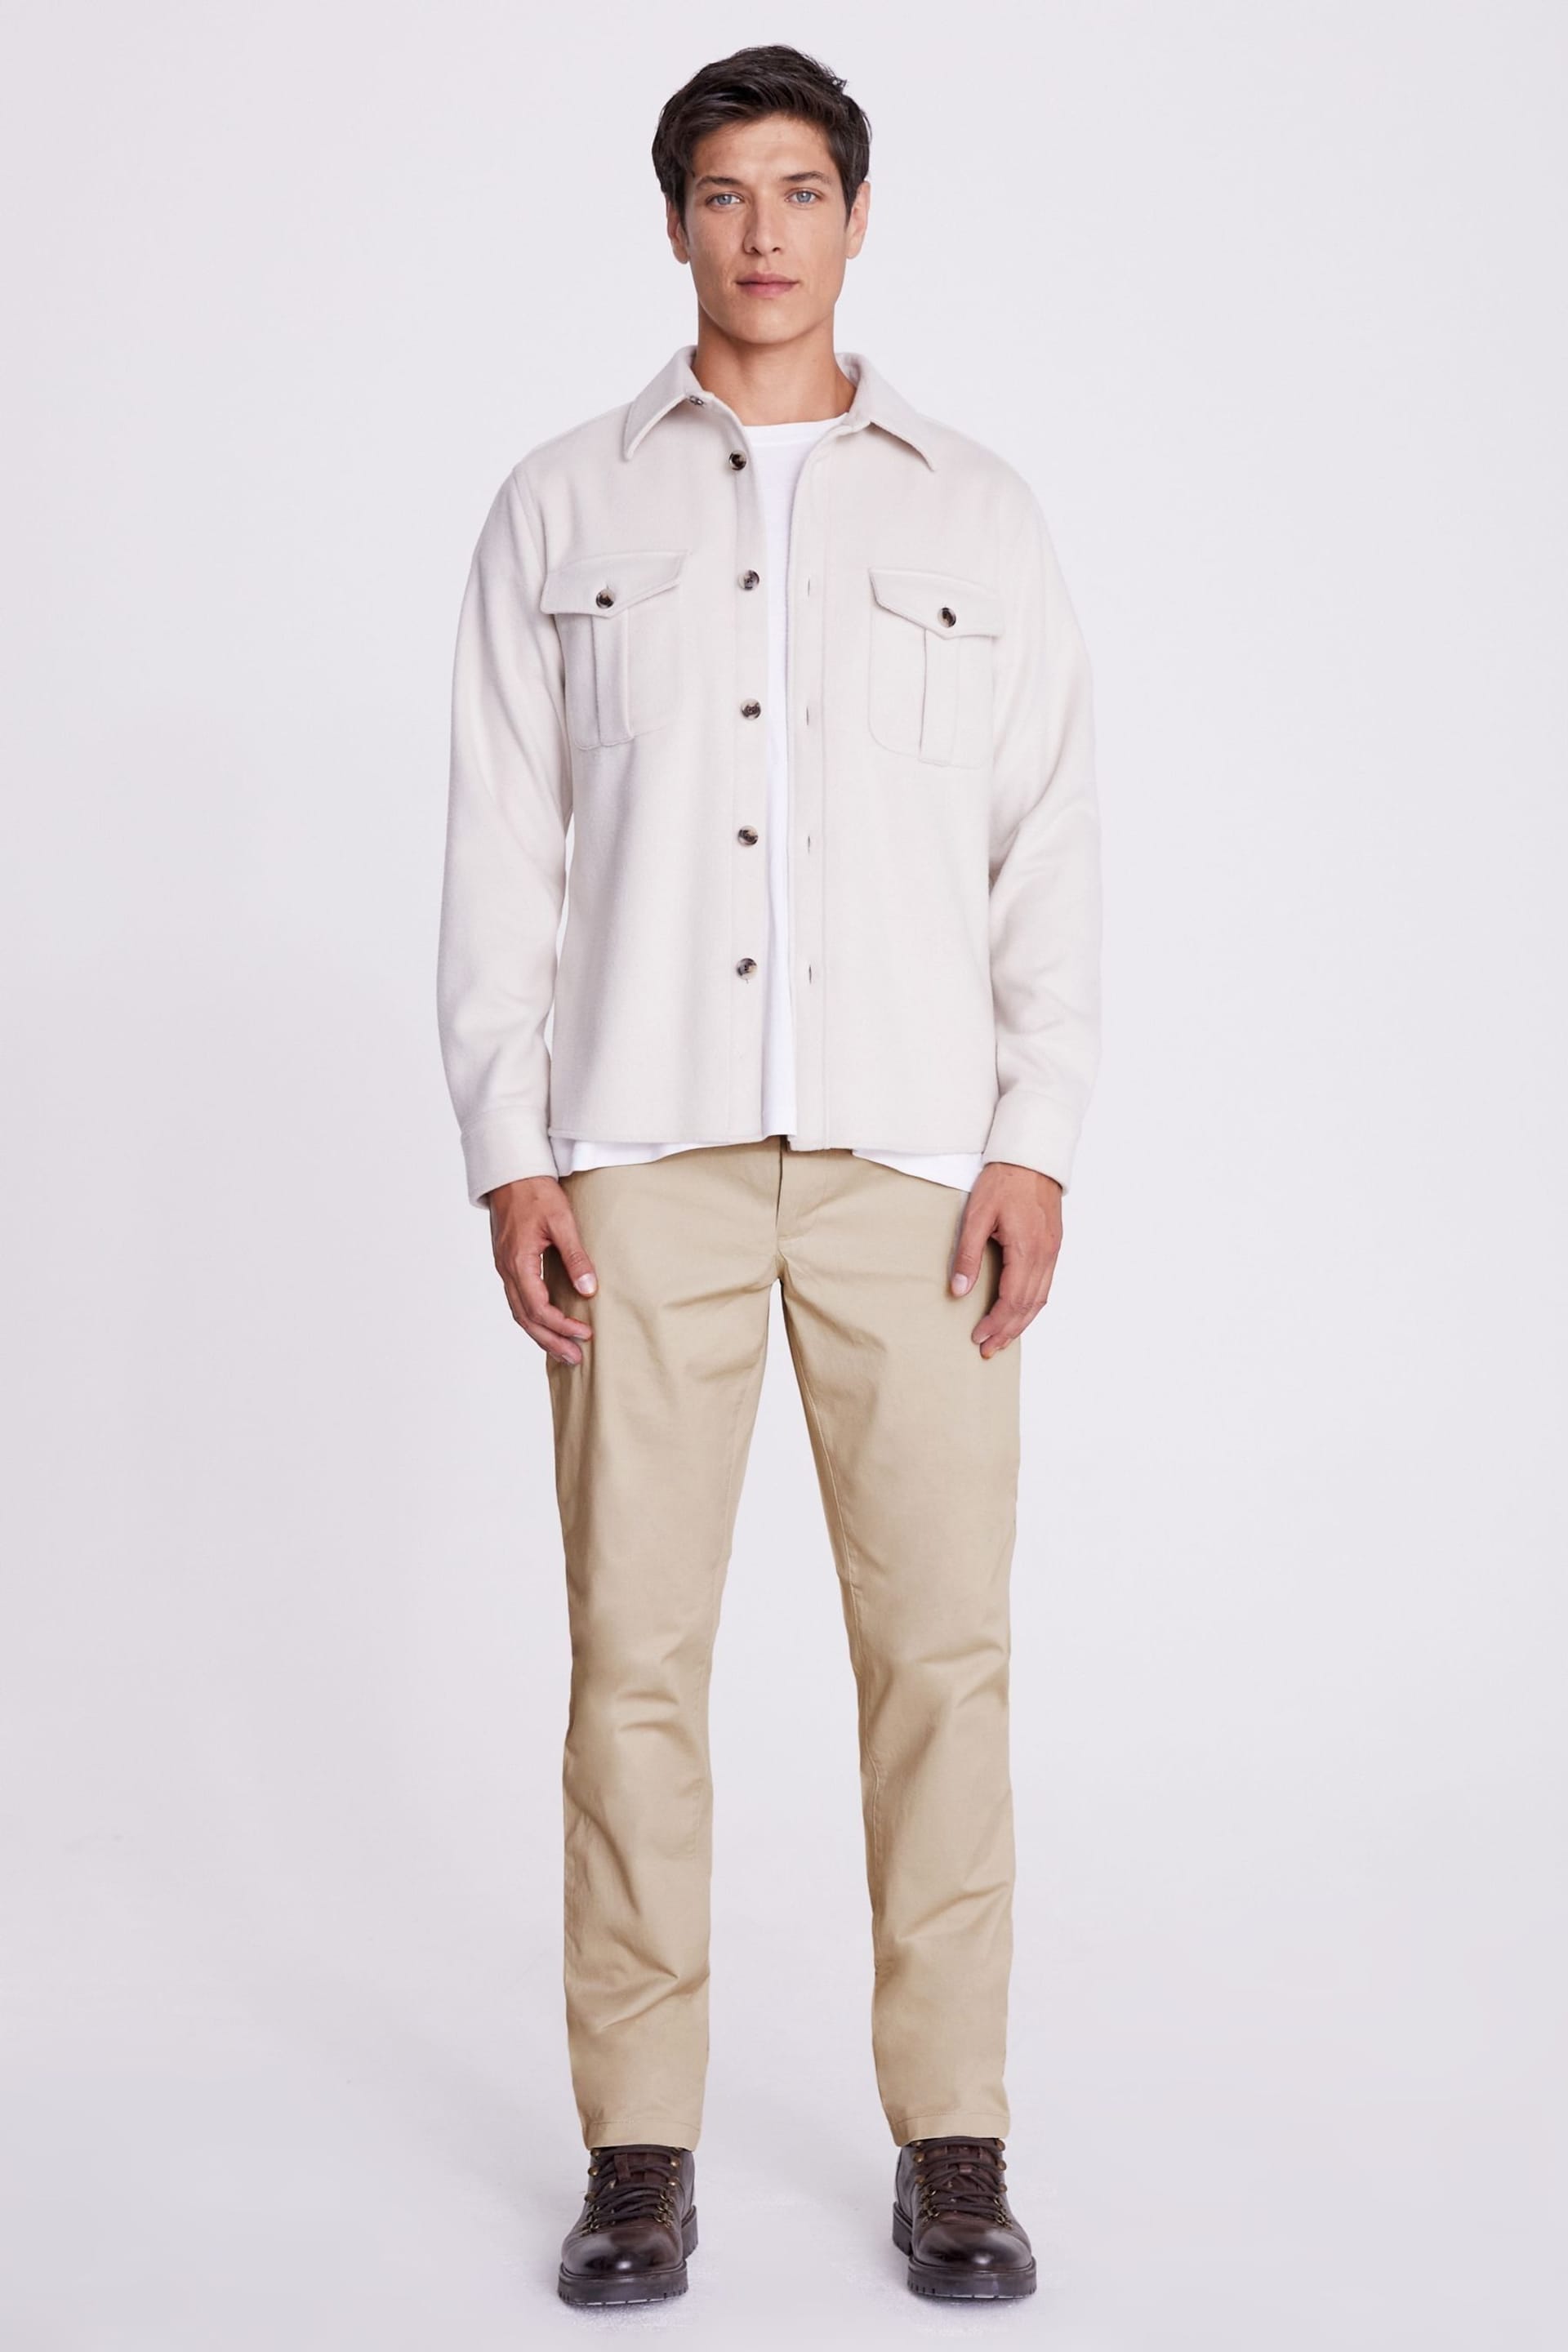 MOSS Natural Tailored Chino Trousers - Image 2 of 4